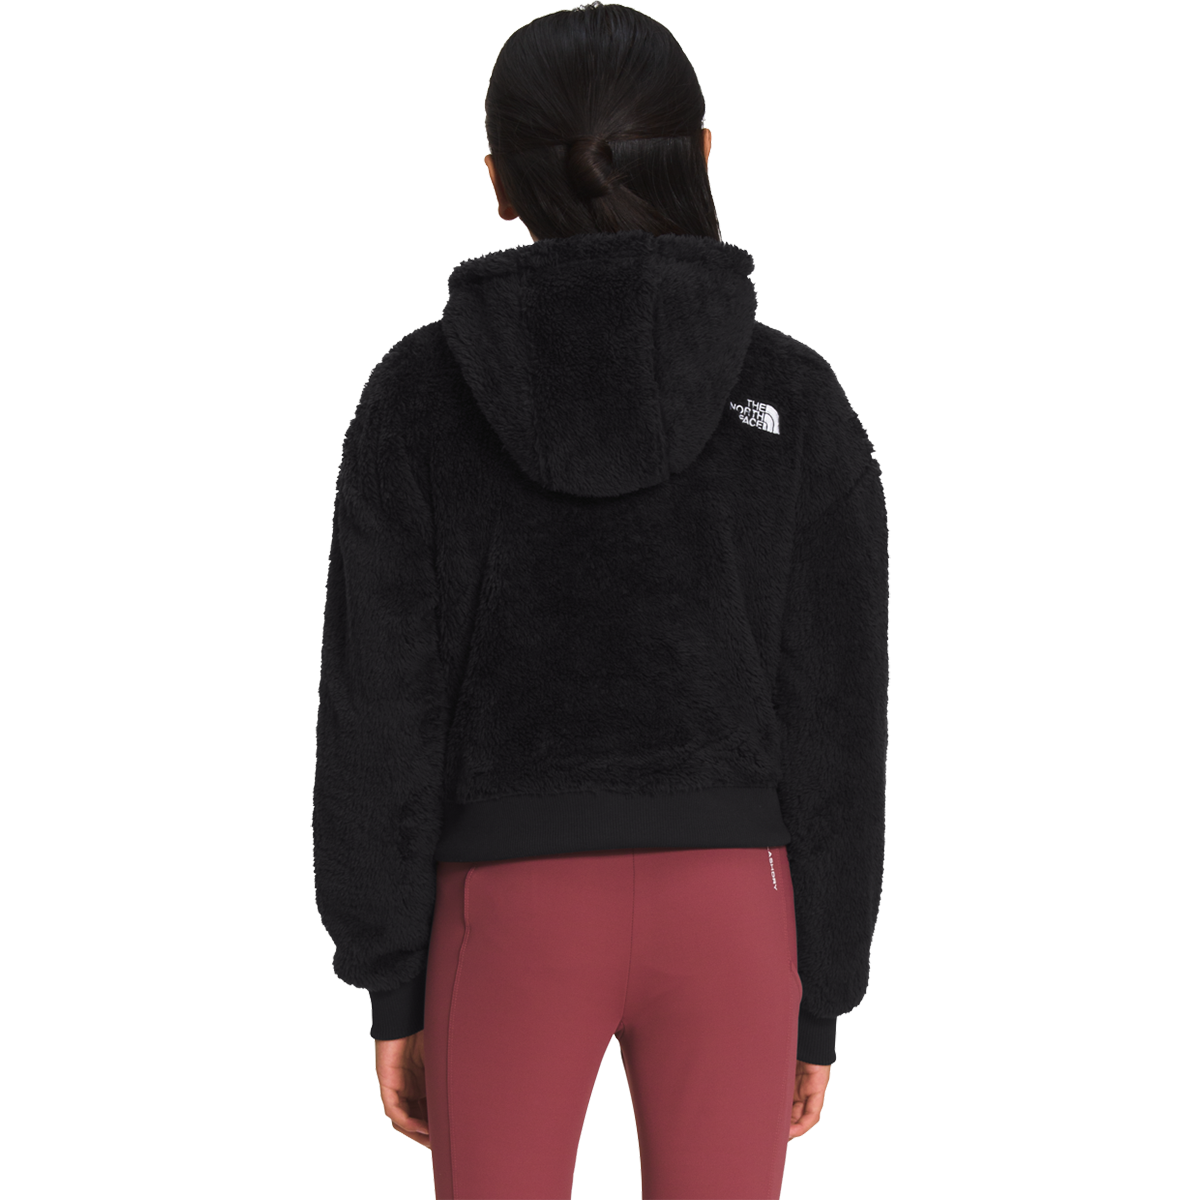 Youth Suave Oso Full-Zip Hooded Jacket alternate view